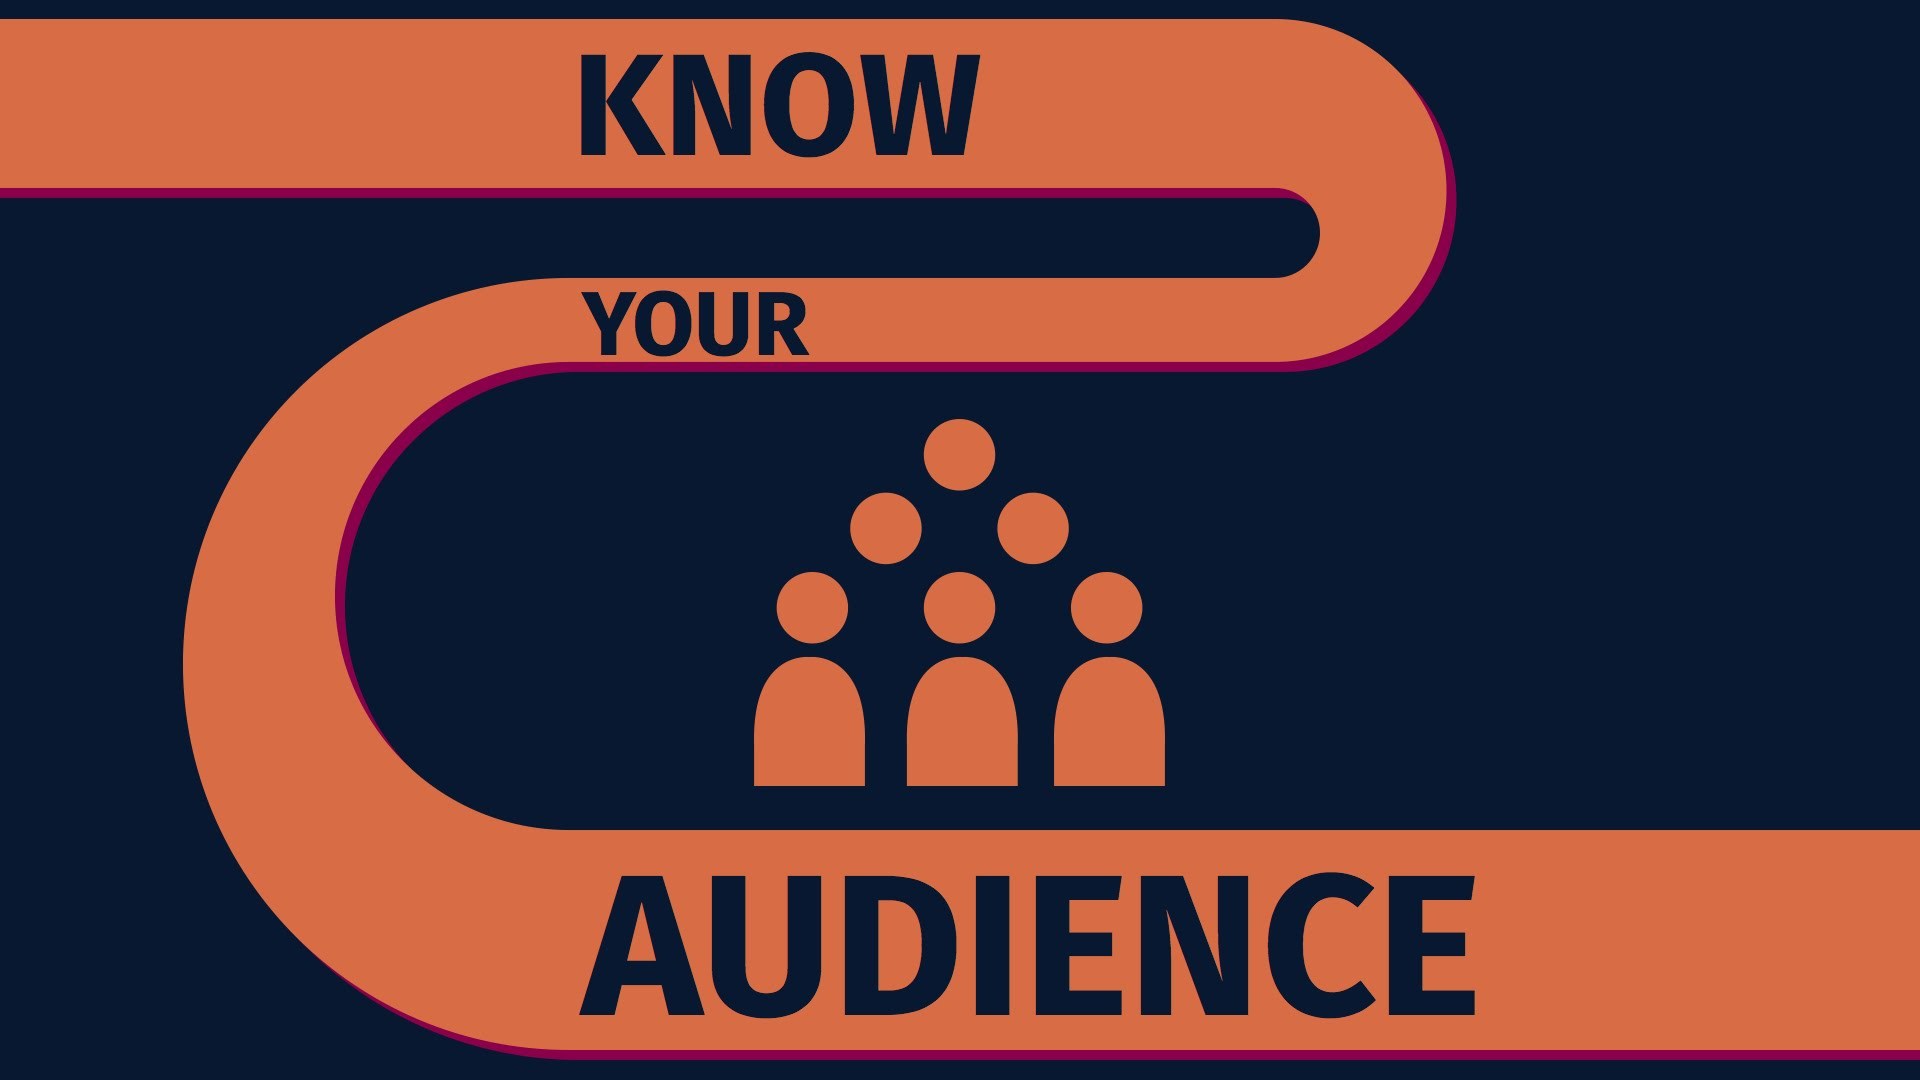 Understand Your Audiences